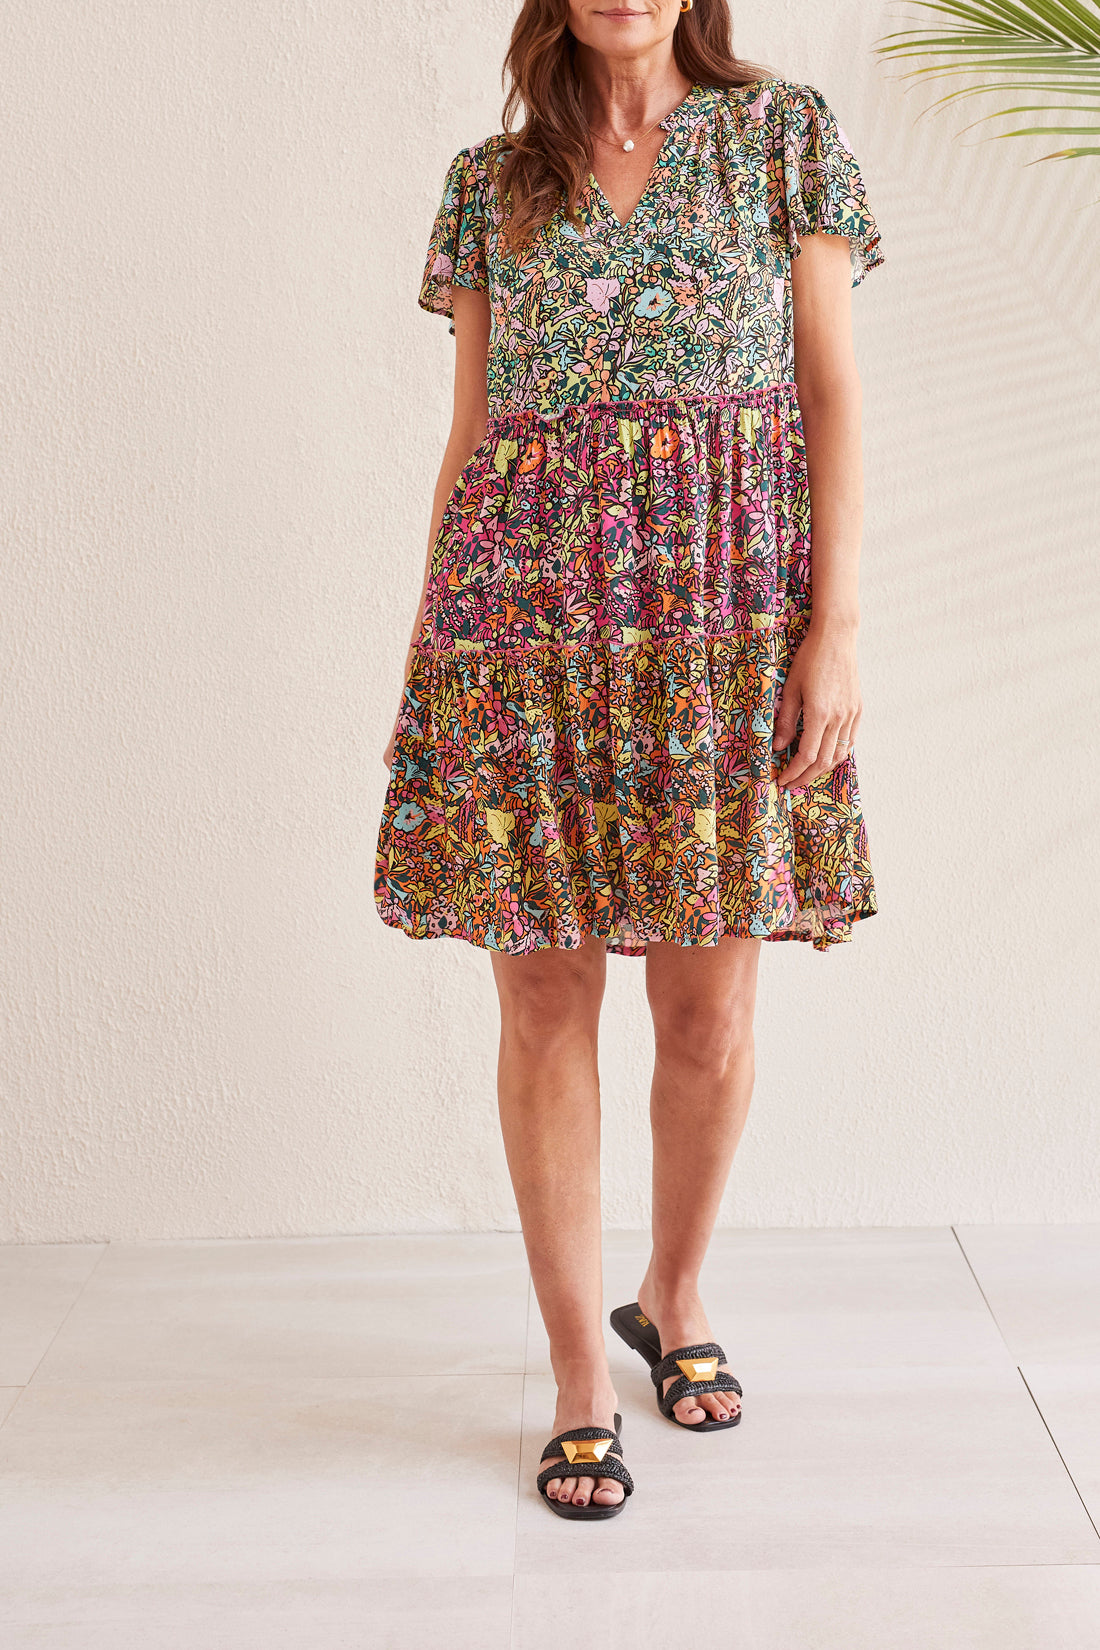 Ditzy Printed Tiered Dress by Tribal